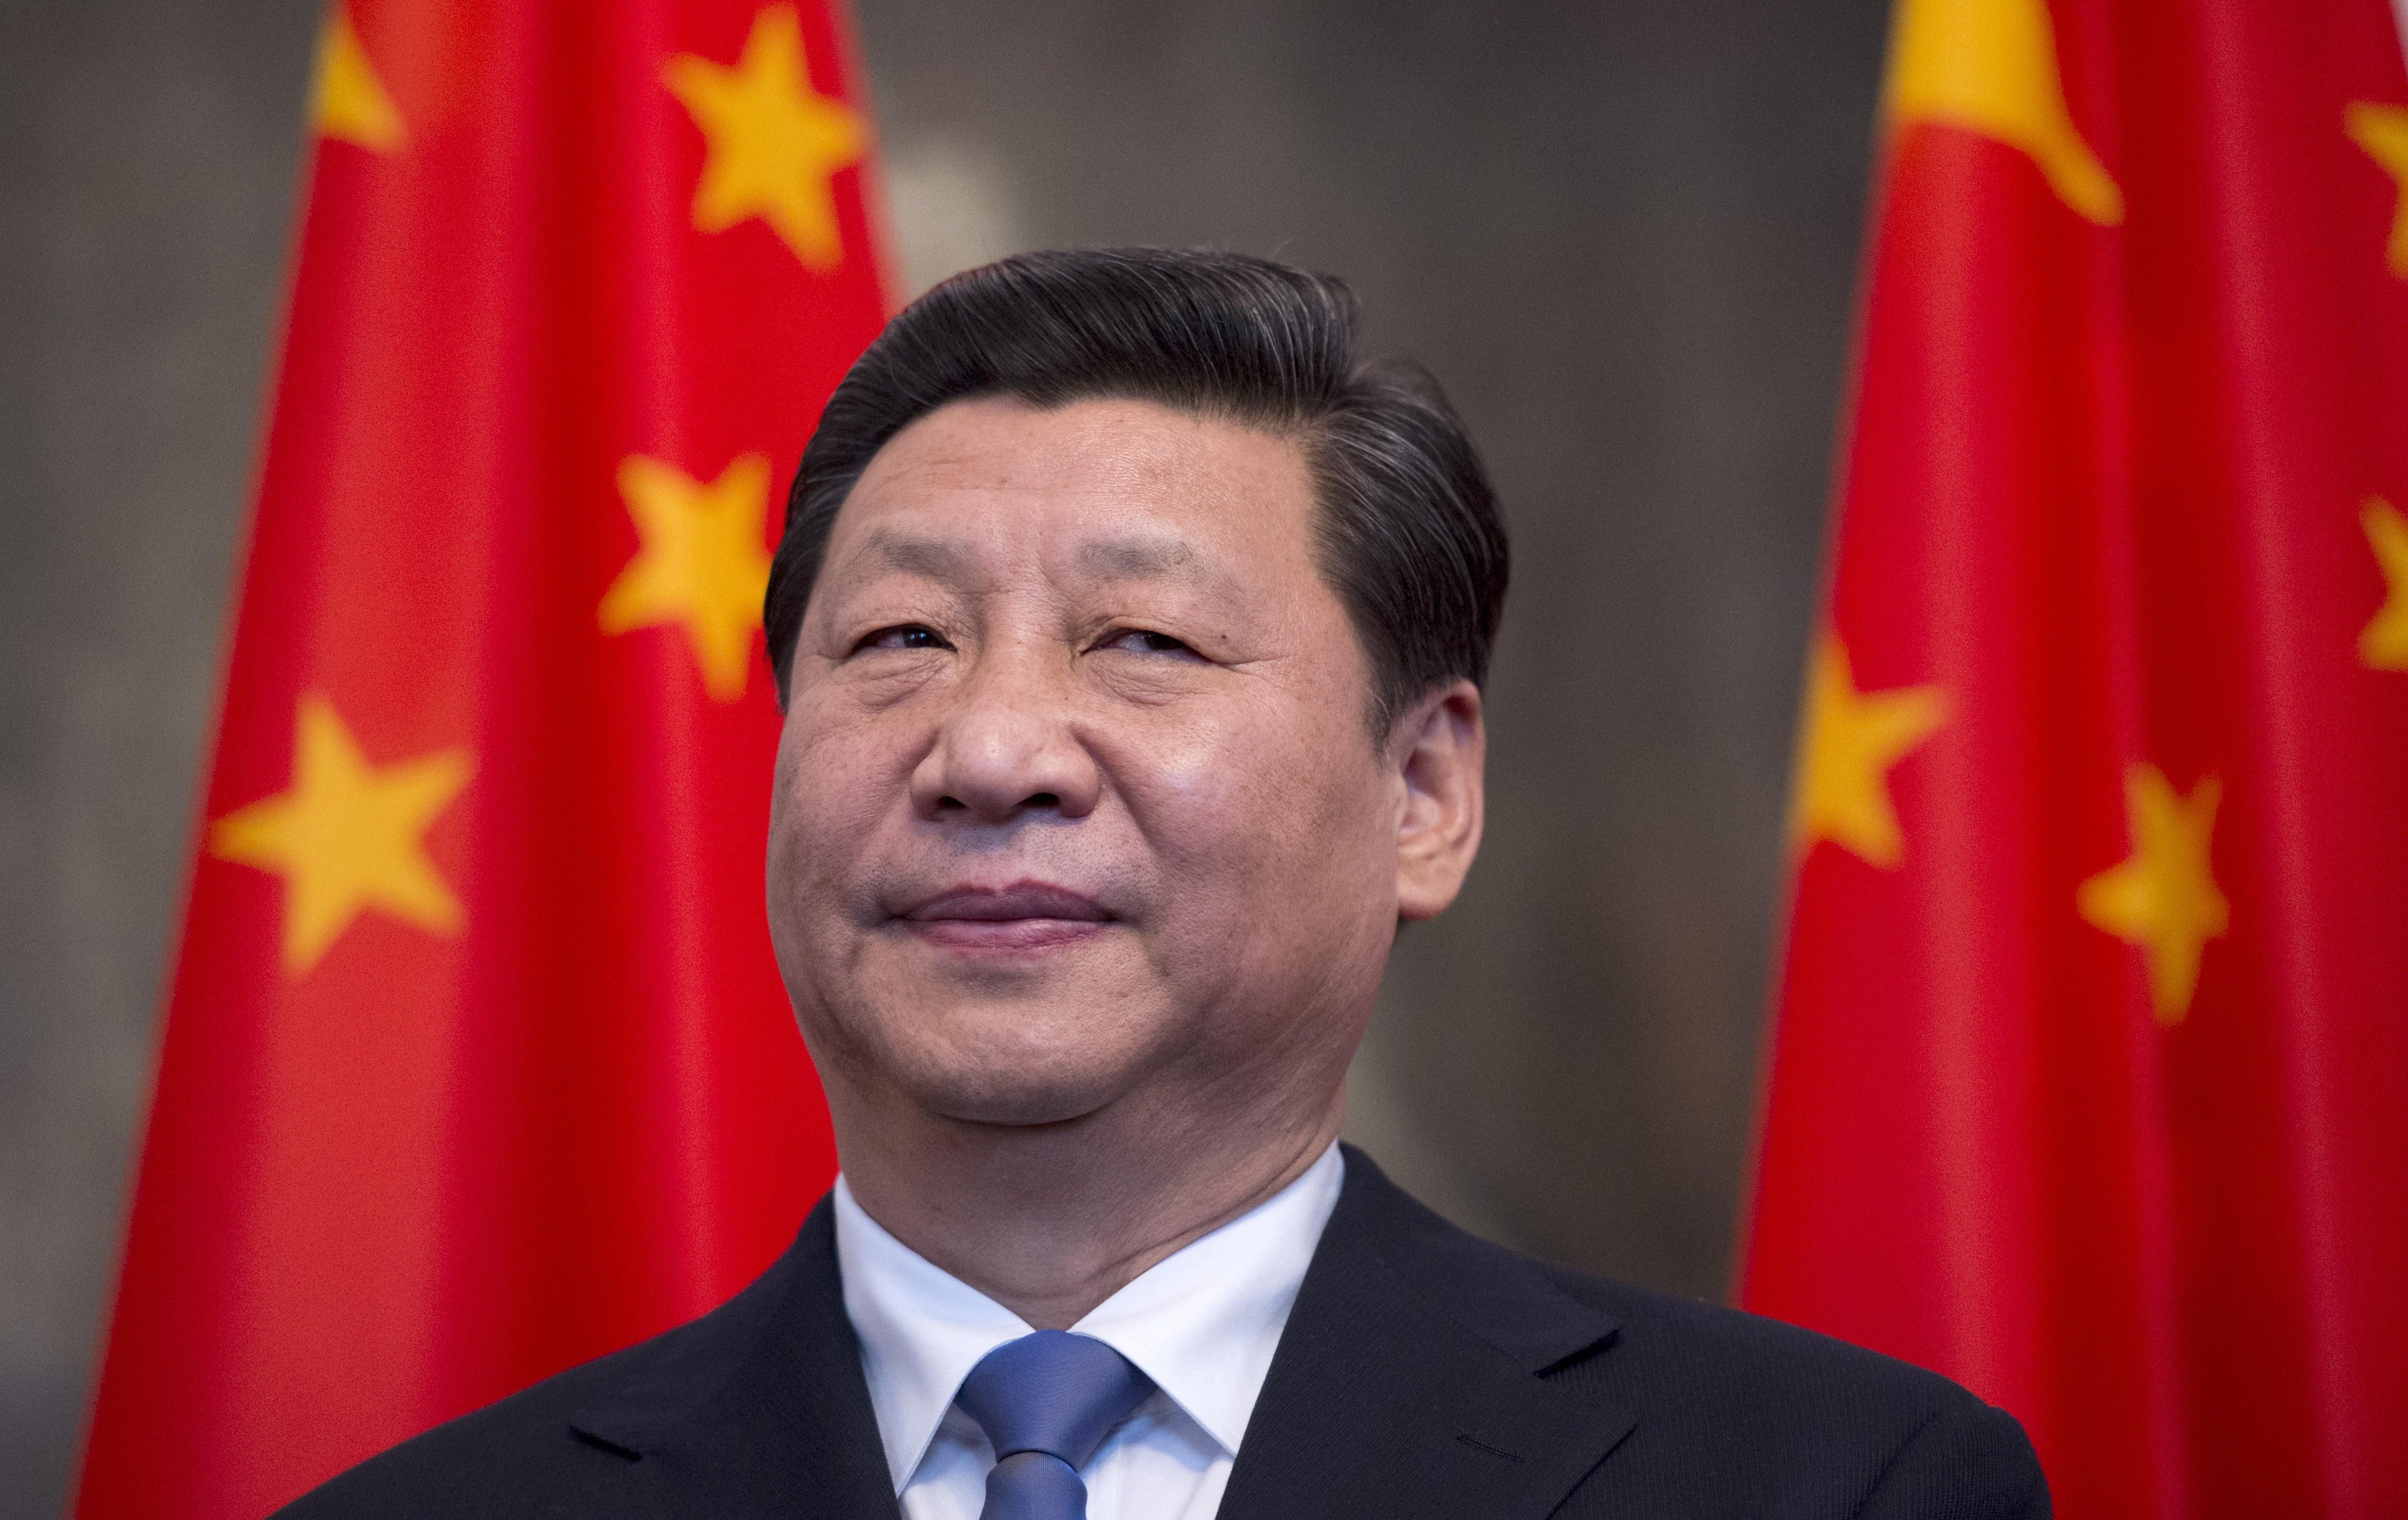 Panama Papers Spell Trouble for China President Xi Jinping